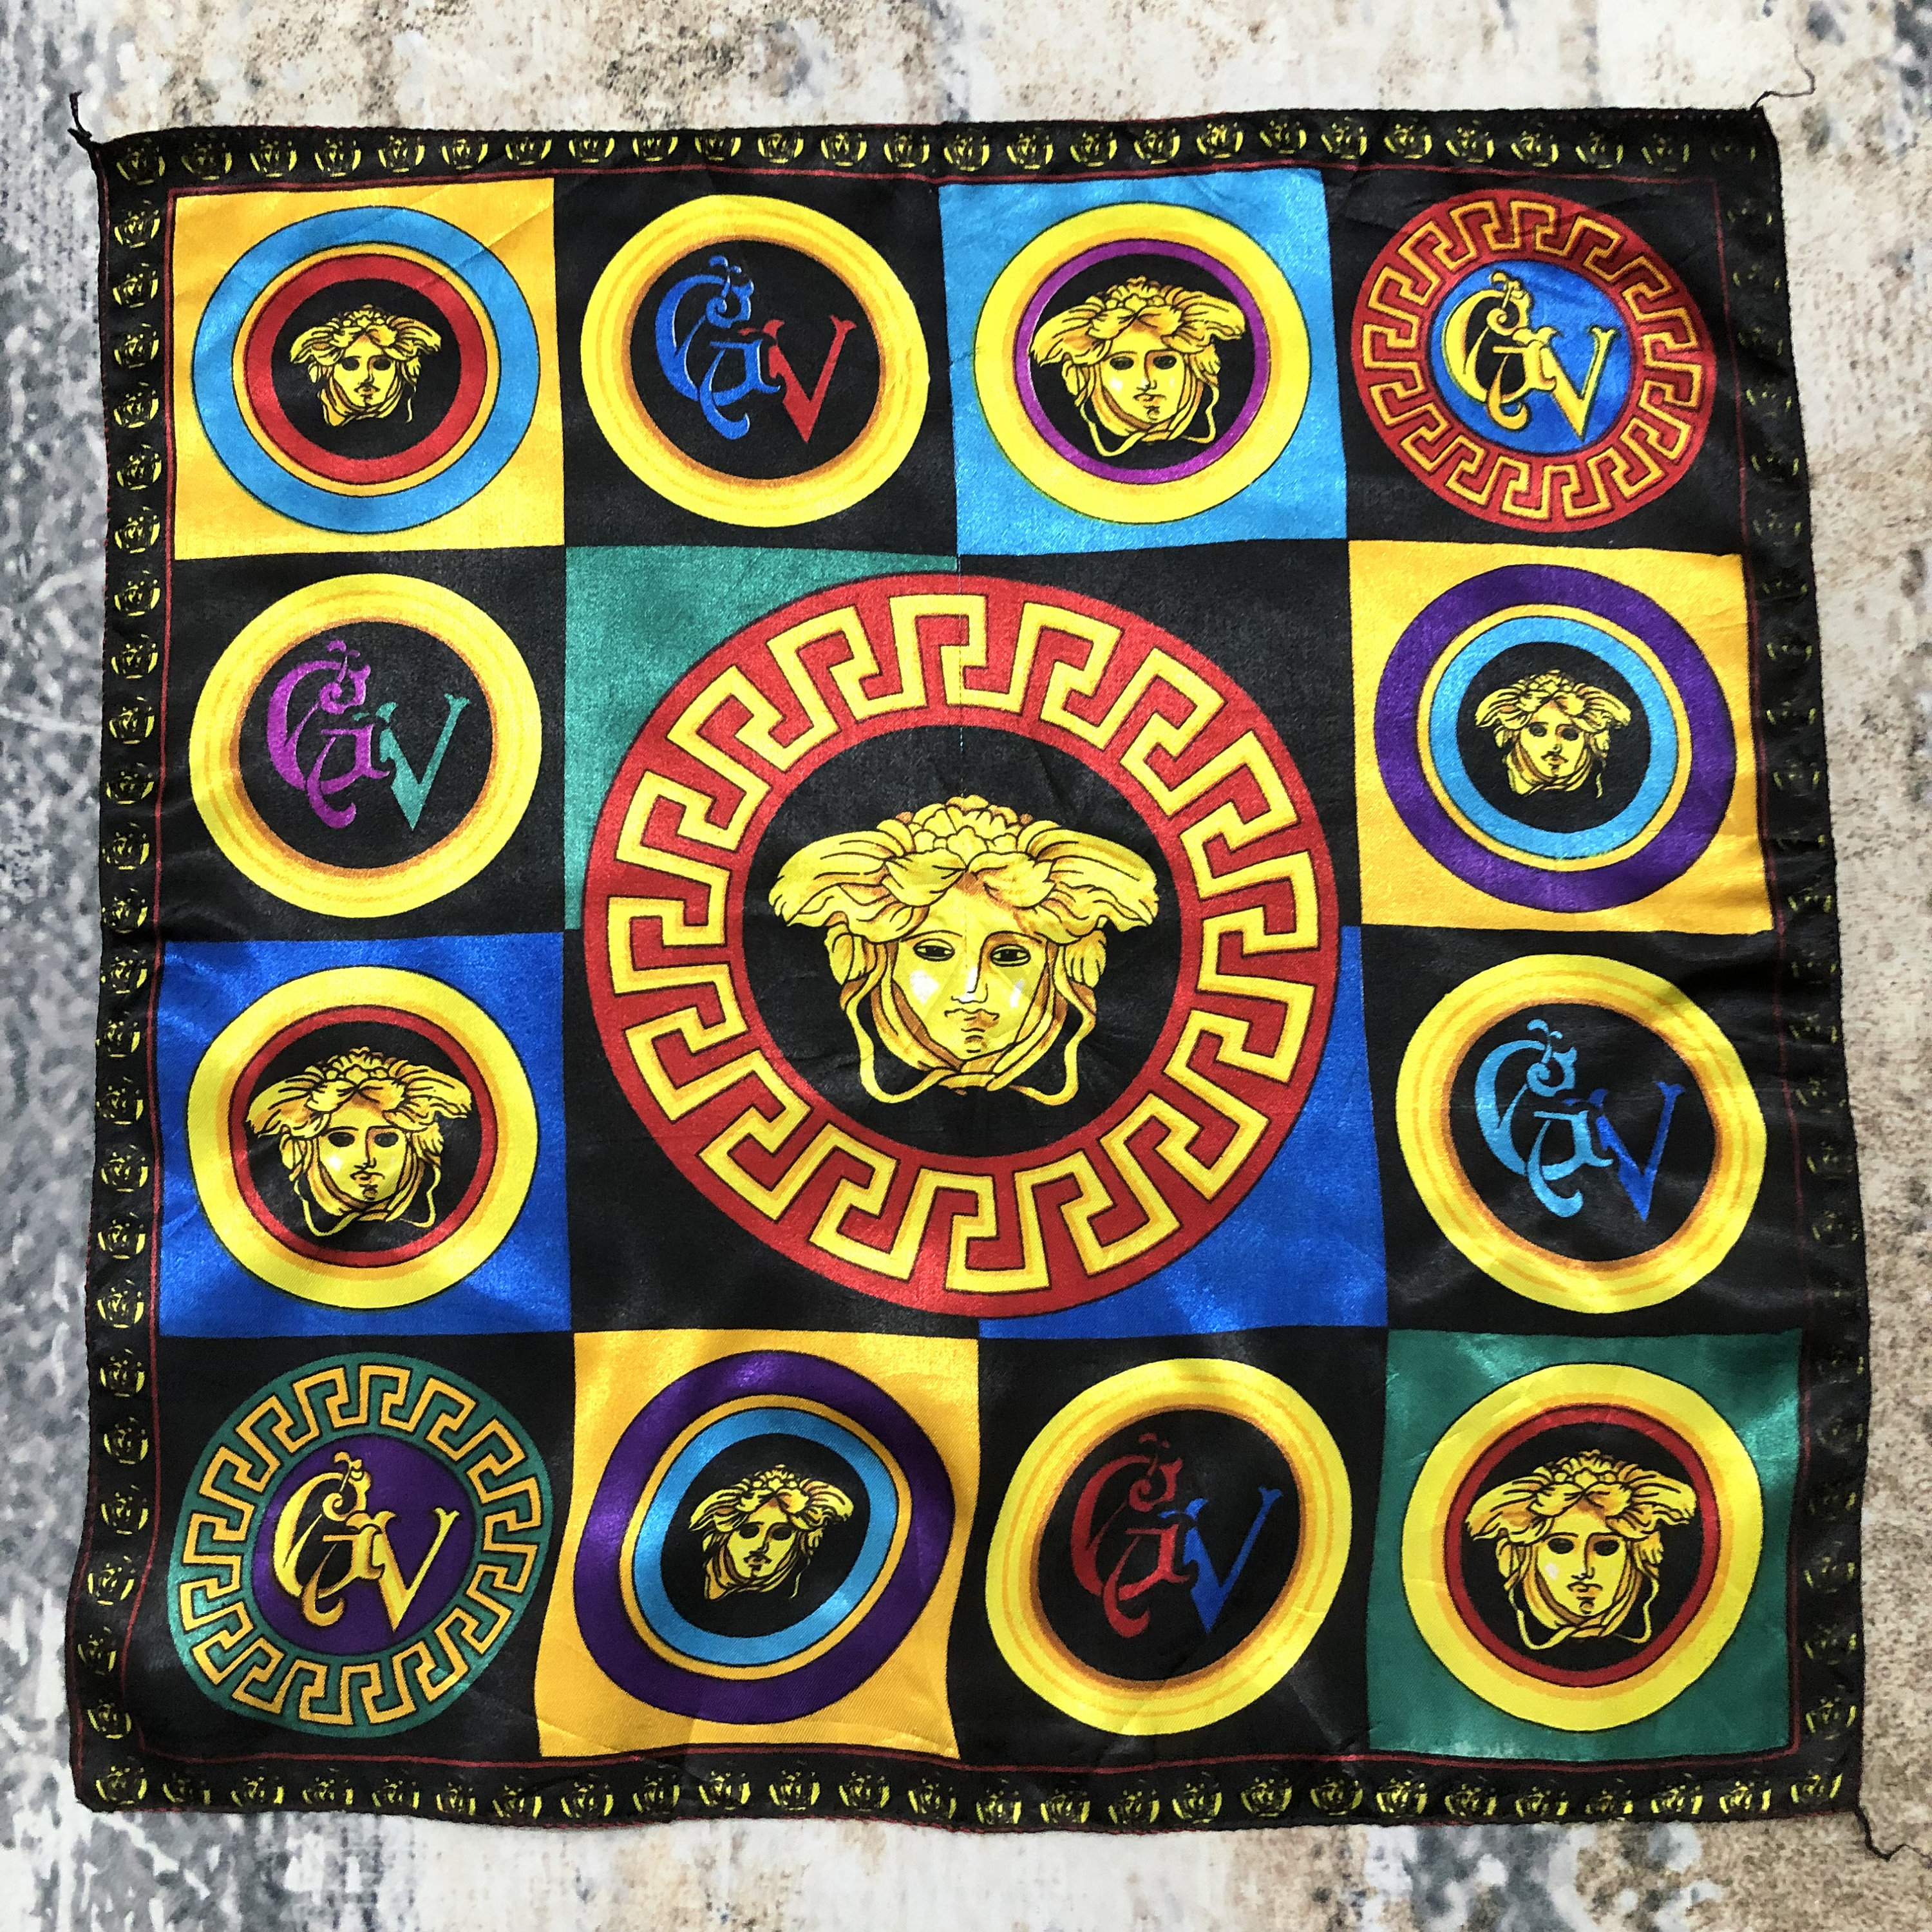 GIANNI VERSACE silk scarf Baroque print size 34" from 1992 royal blue  & gold